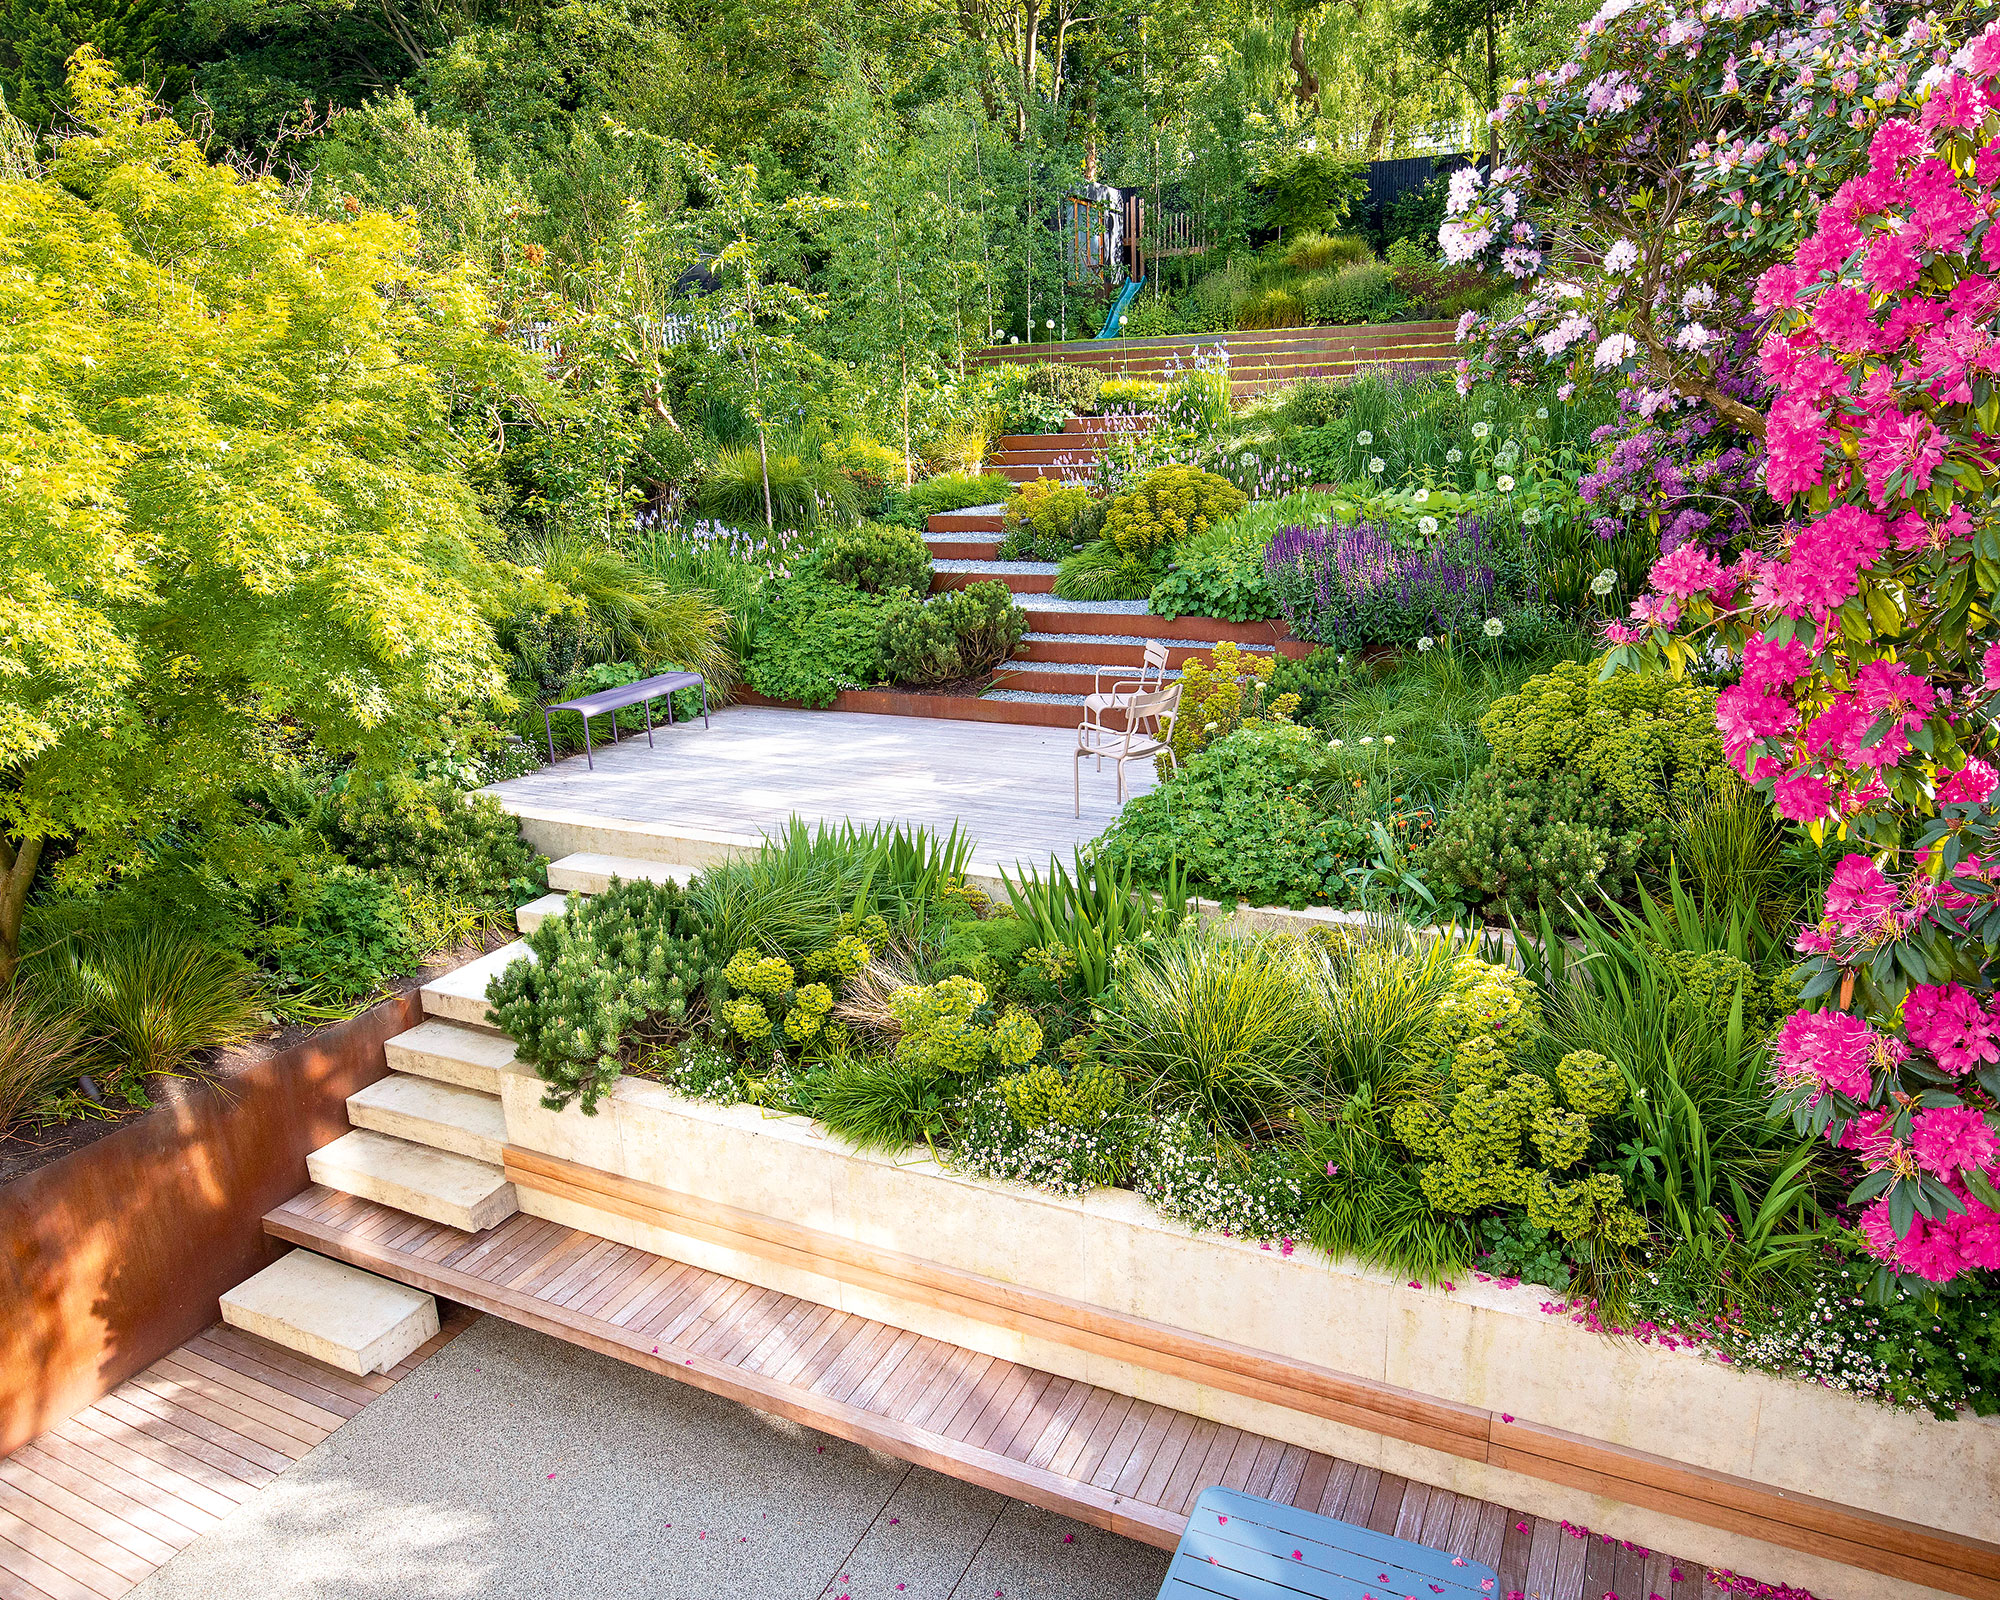 Multi level garden with wooden steps, pink flowers, trees and plants